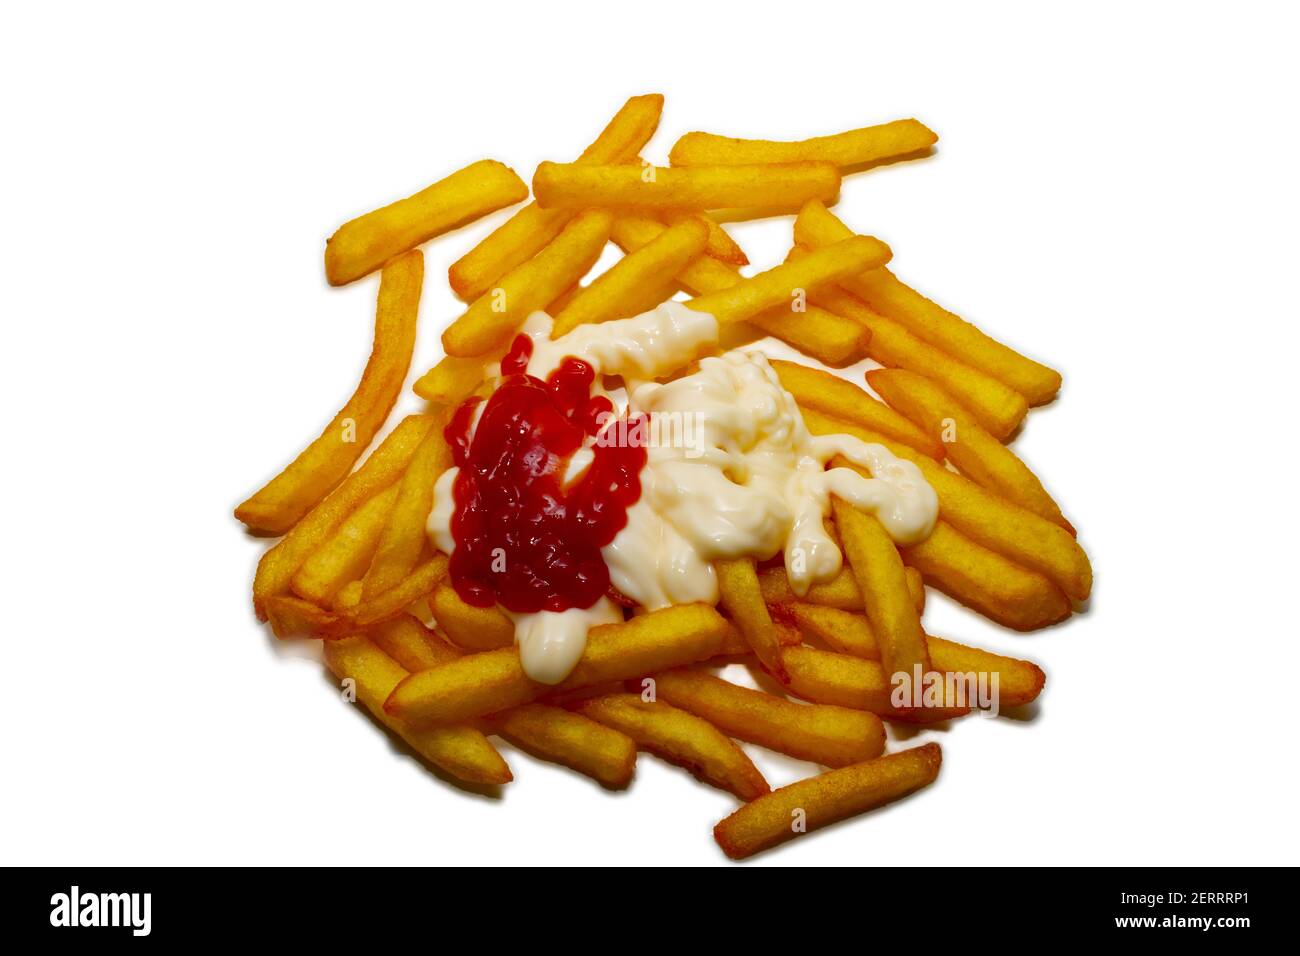 unhealthy french fries with ketchup and mayonnaise isolated on white background Stock Photo